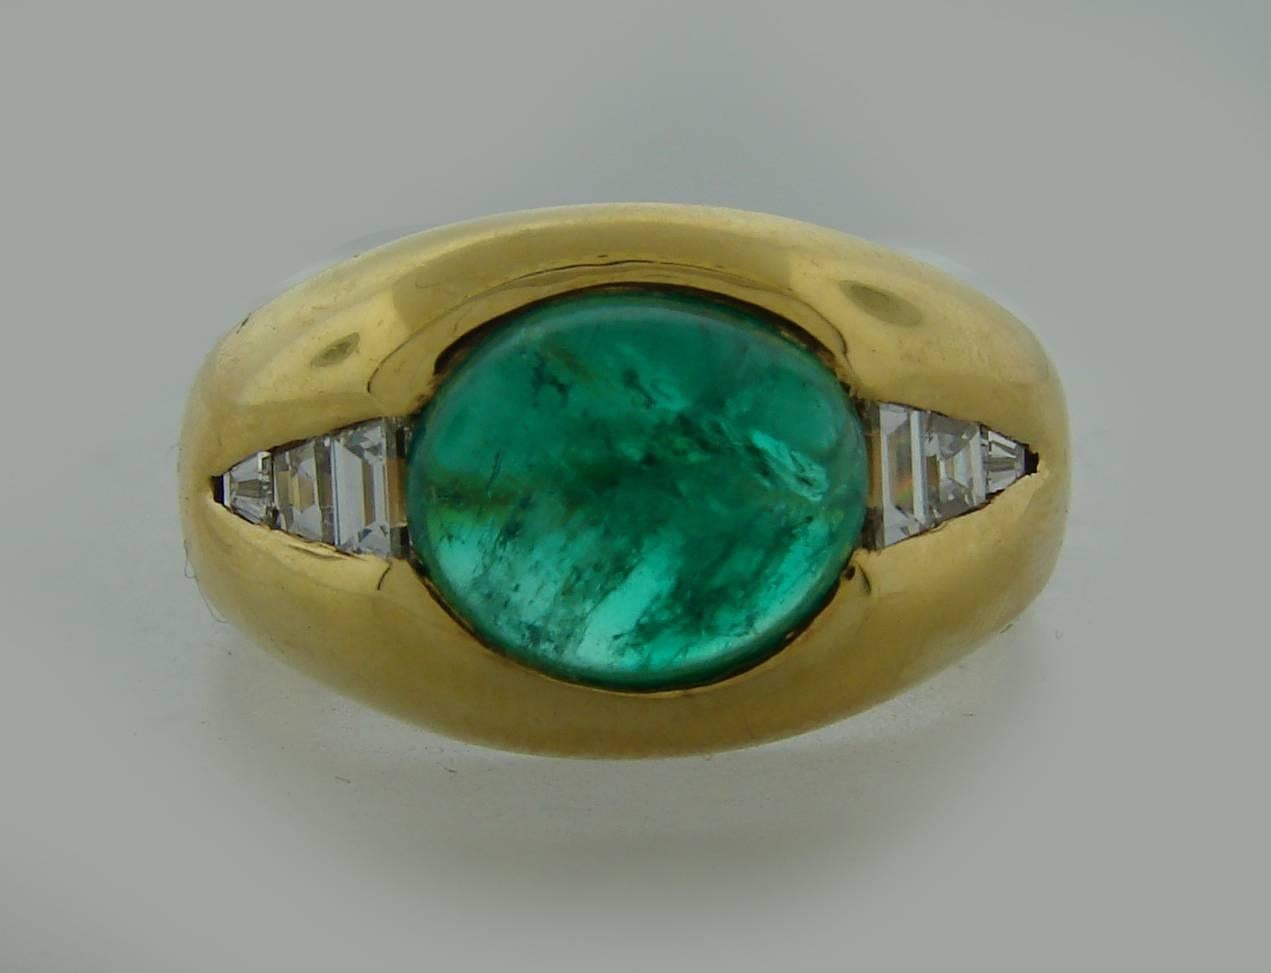 Chic and elegant ring created by Bulgari in the 1970's. Features a cabochon emerald set in 18k yellow gold and accented with trapeze cut diamonds. The emerald measures 9.26 x 7.67 x 5.65 mm and weighs approximately 2.88 carats. The diamond total